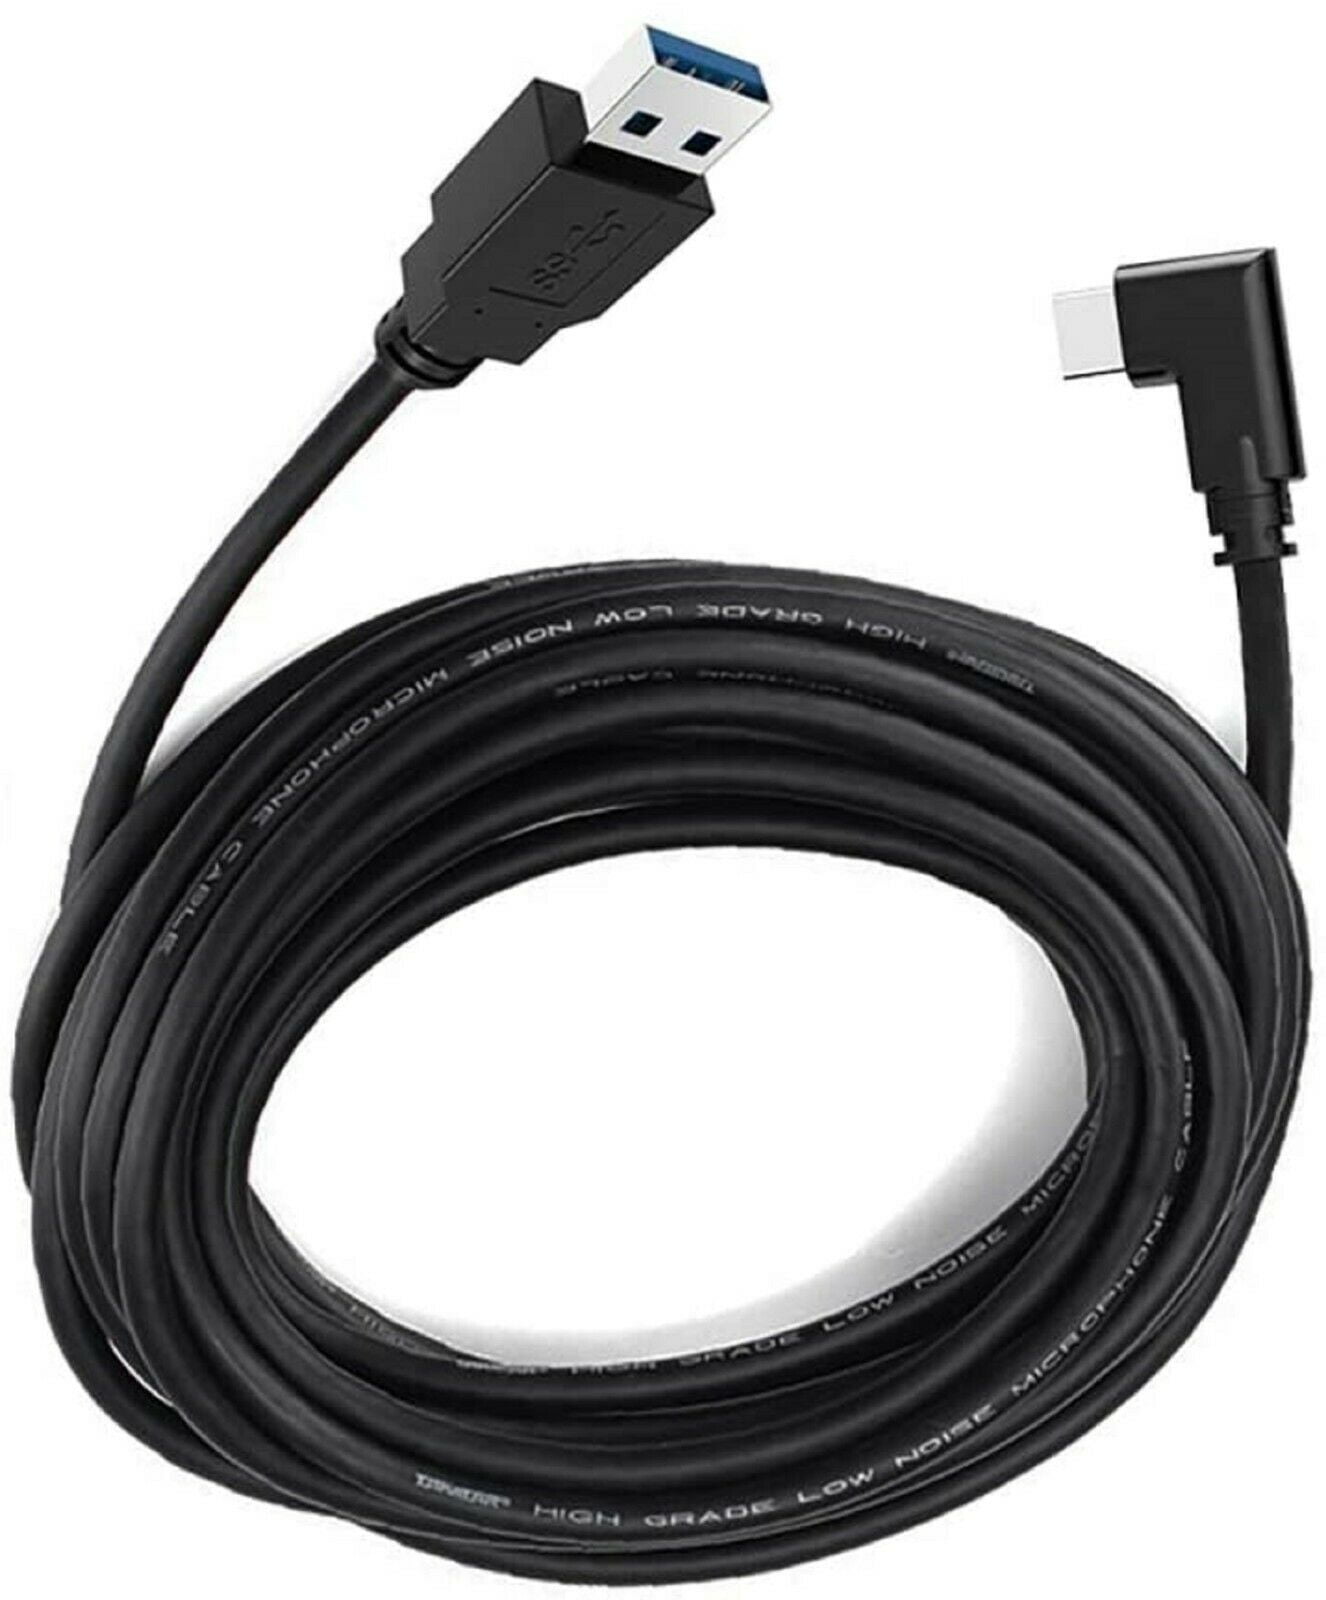 FULL-Data Line Charging Cable for Oculus Quest LINK VR Headset 3 Meter Data Cable Color: Black Lysee Data Cables 